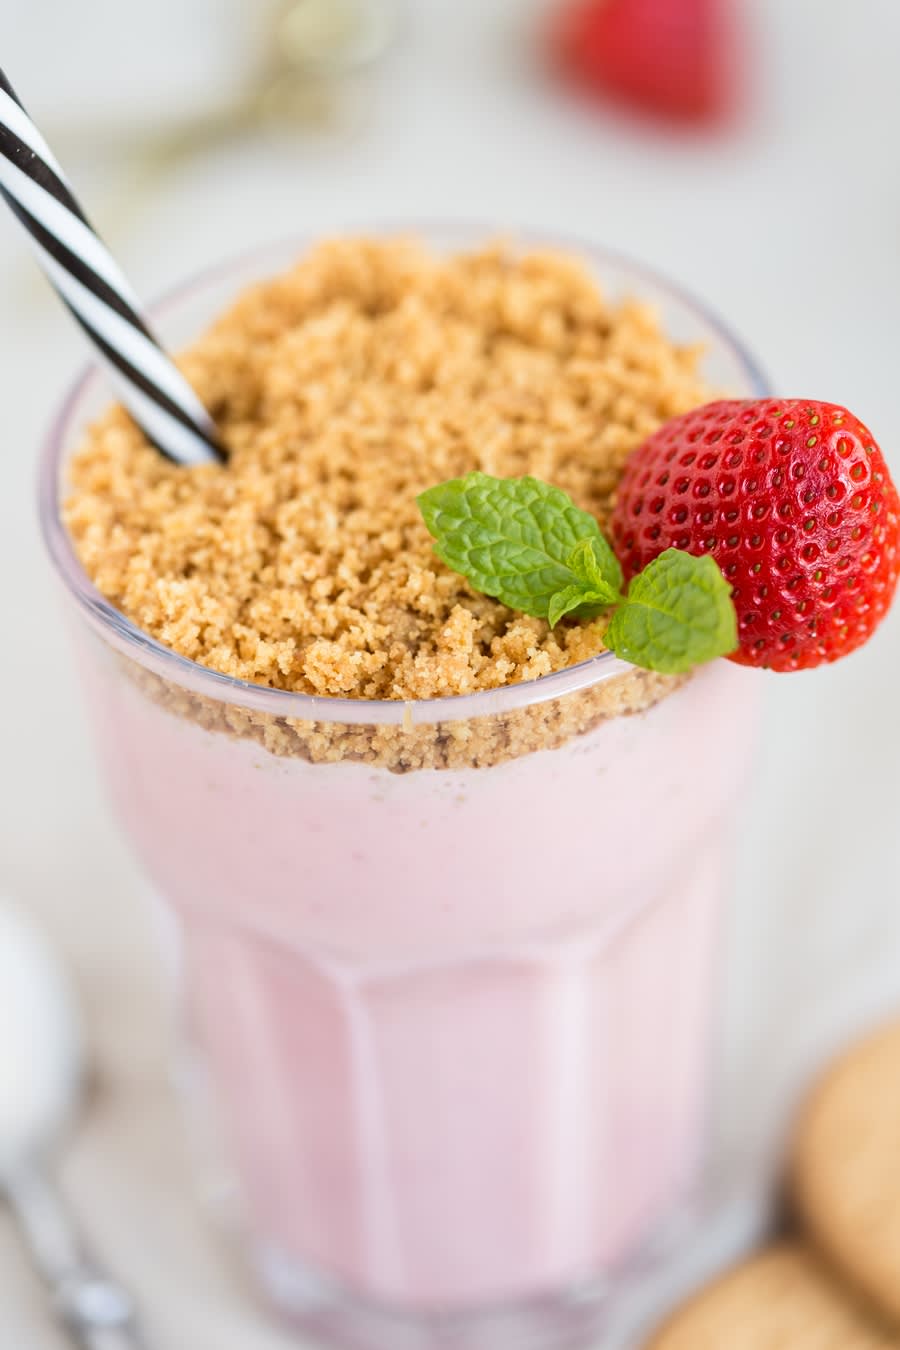 Strawberry cheesecake smoothie - Electric Blue Food - Kitchen stories from abroad